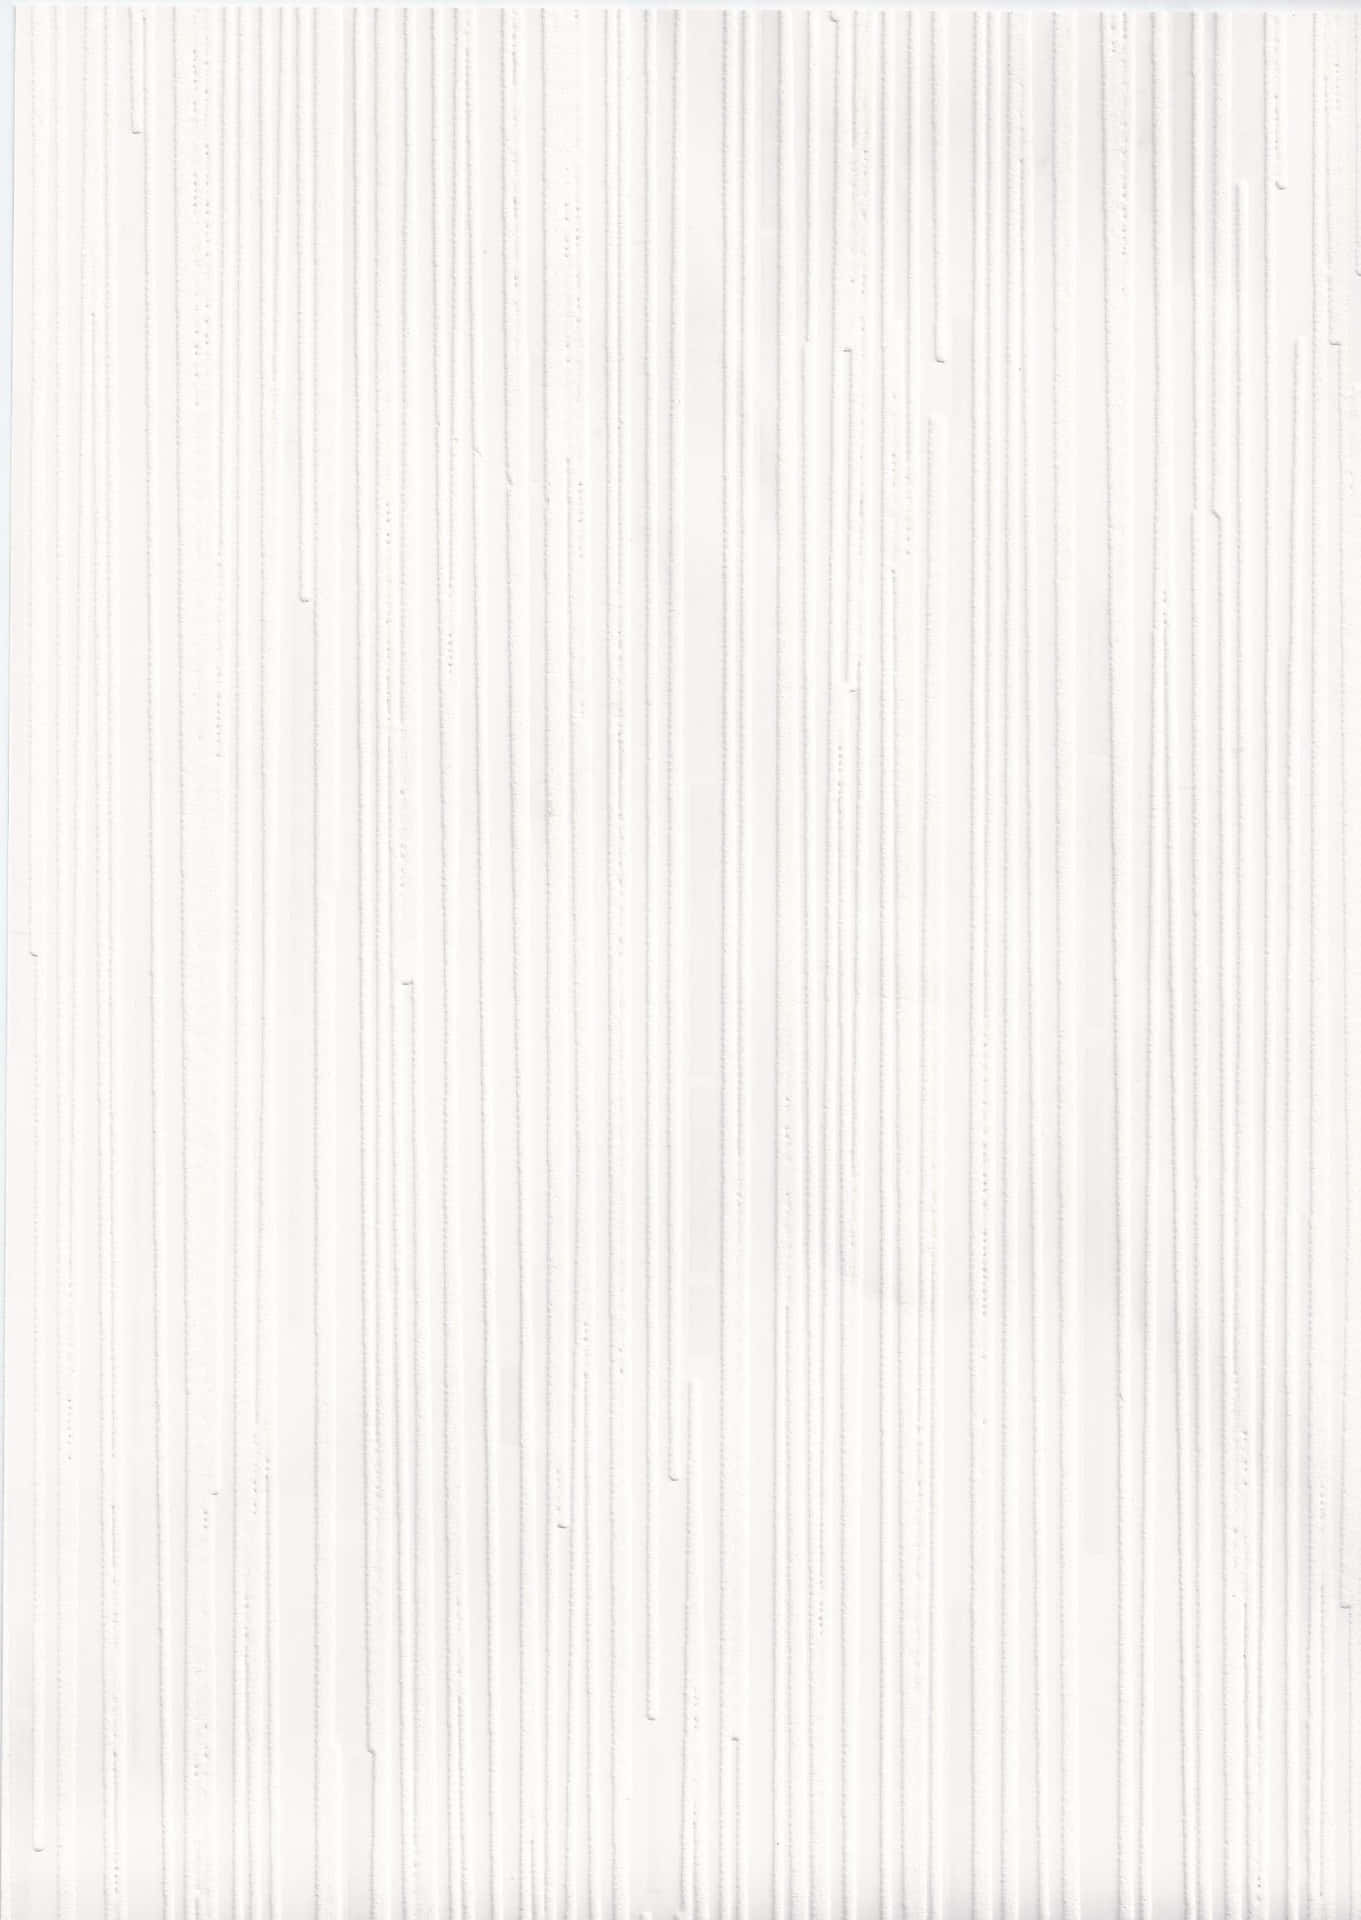 100+] Solid White Background s 